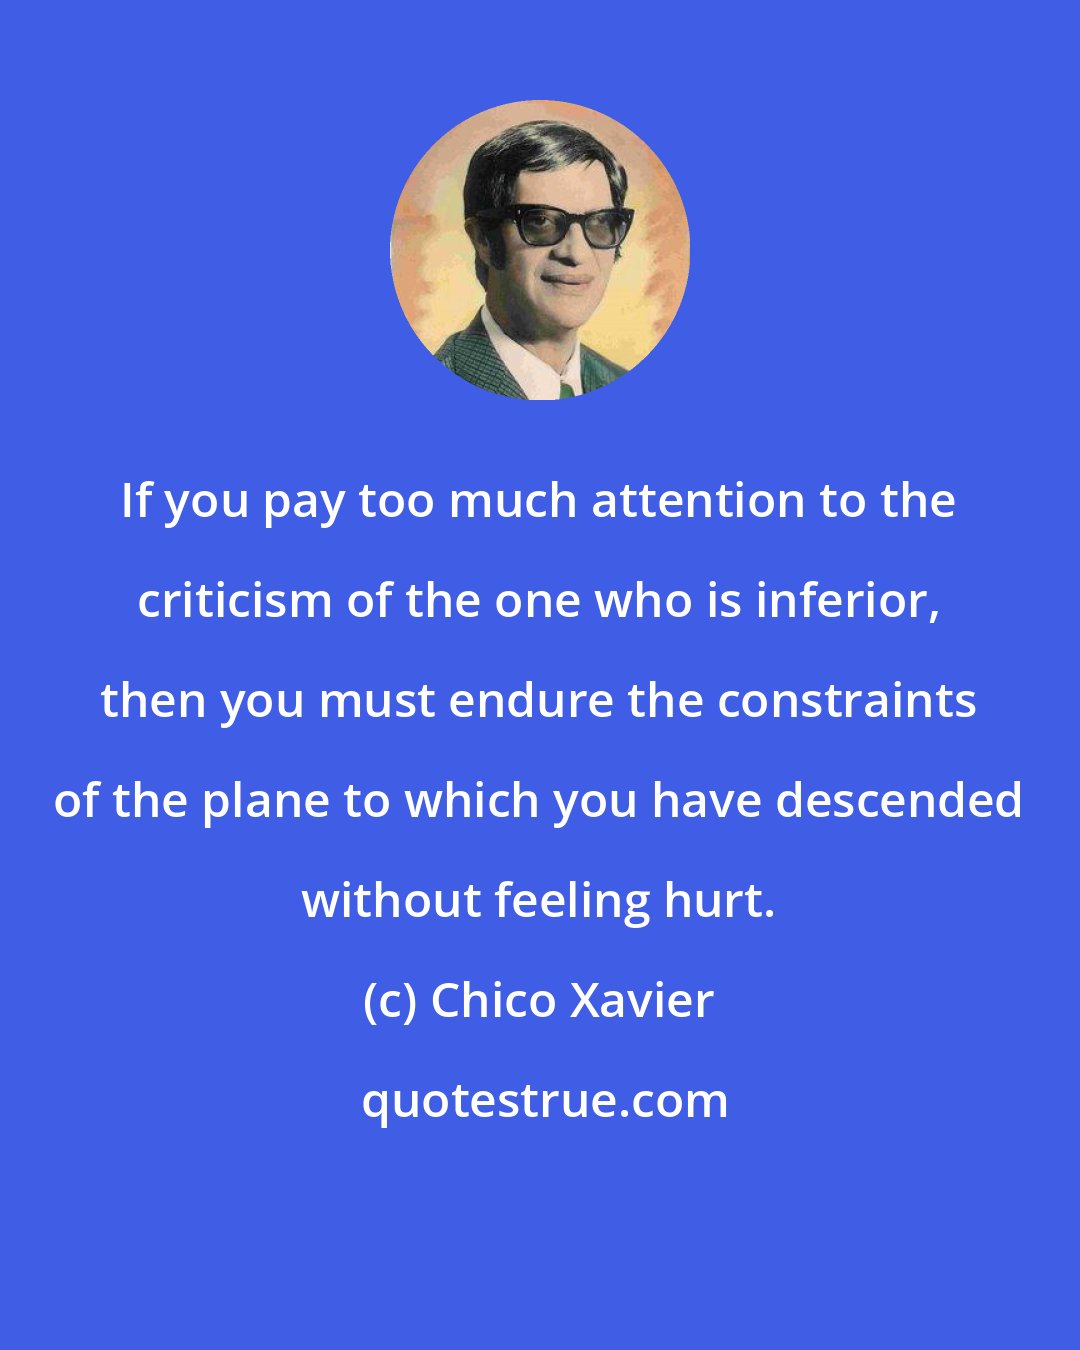 Chico Xavier: If you pay too much attention to the criticism of the one who is inferior, then you must endure the constraints of the plane to which you have descended without feeling hurt.